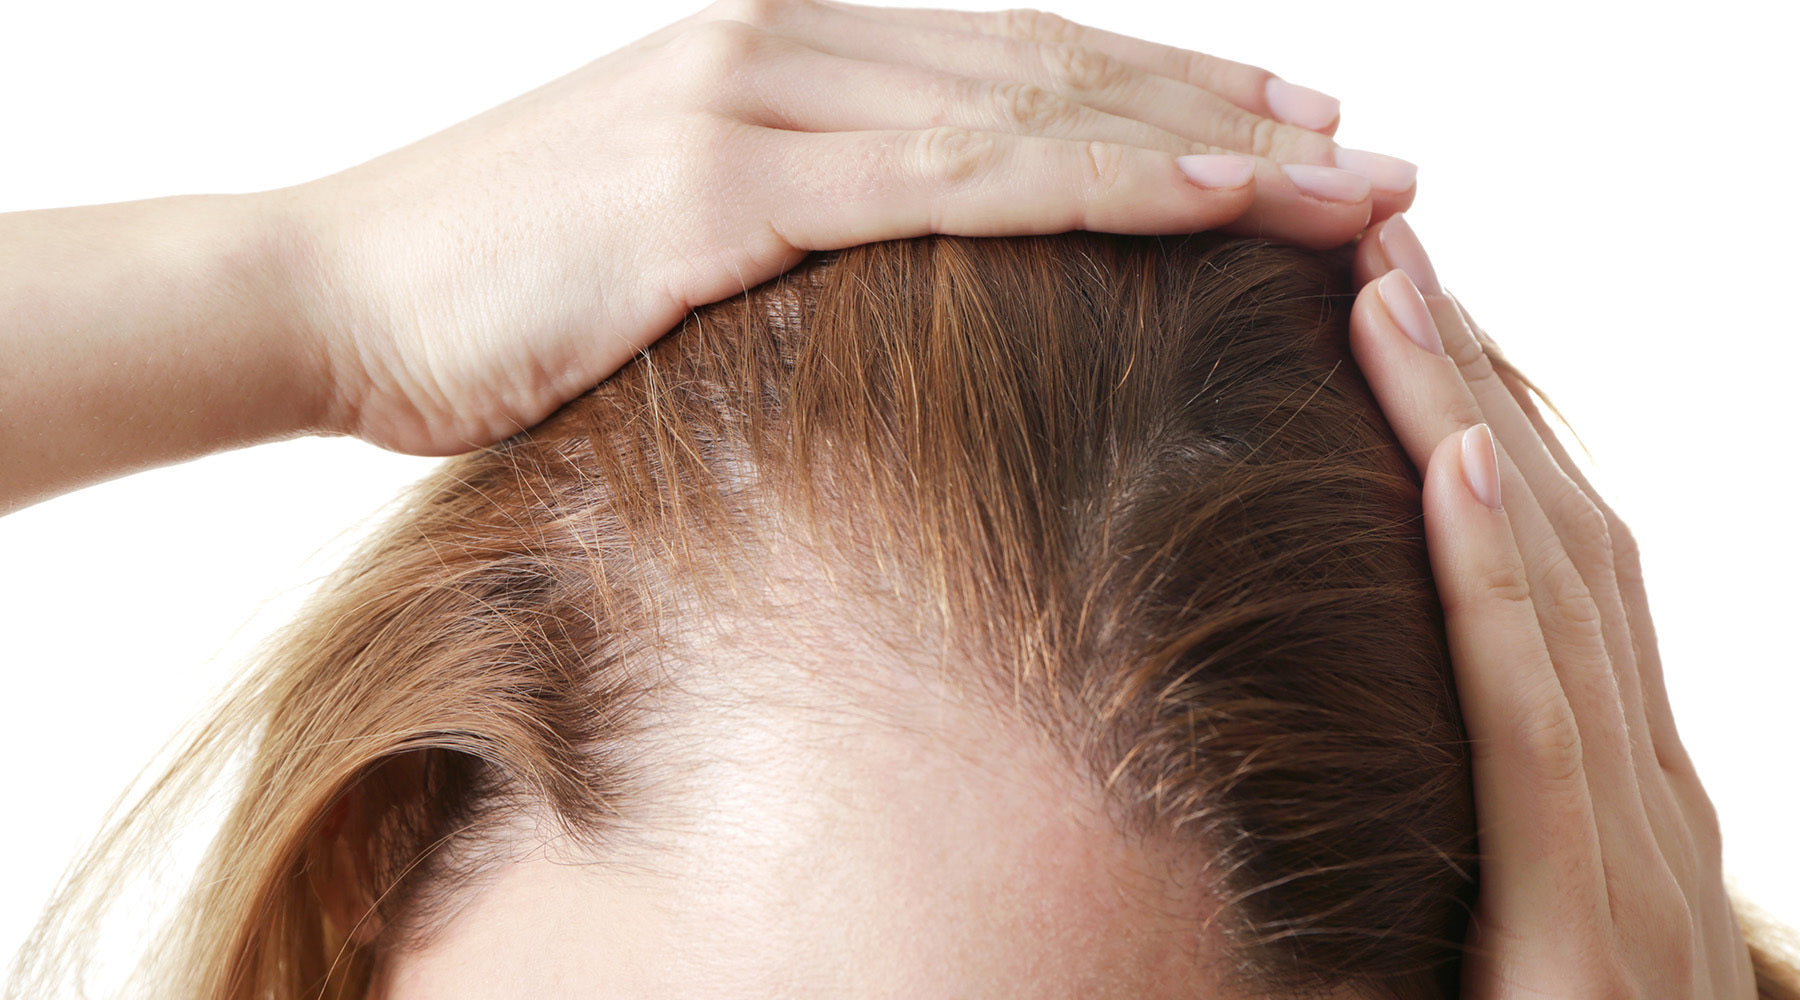 Sudden Postpartum Hair Loss: What Causes it?